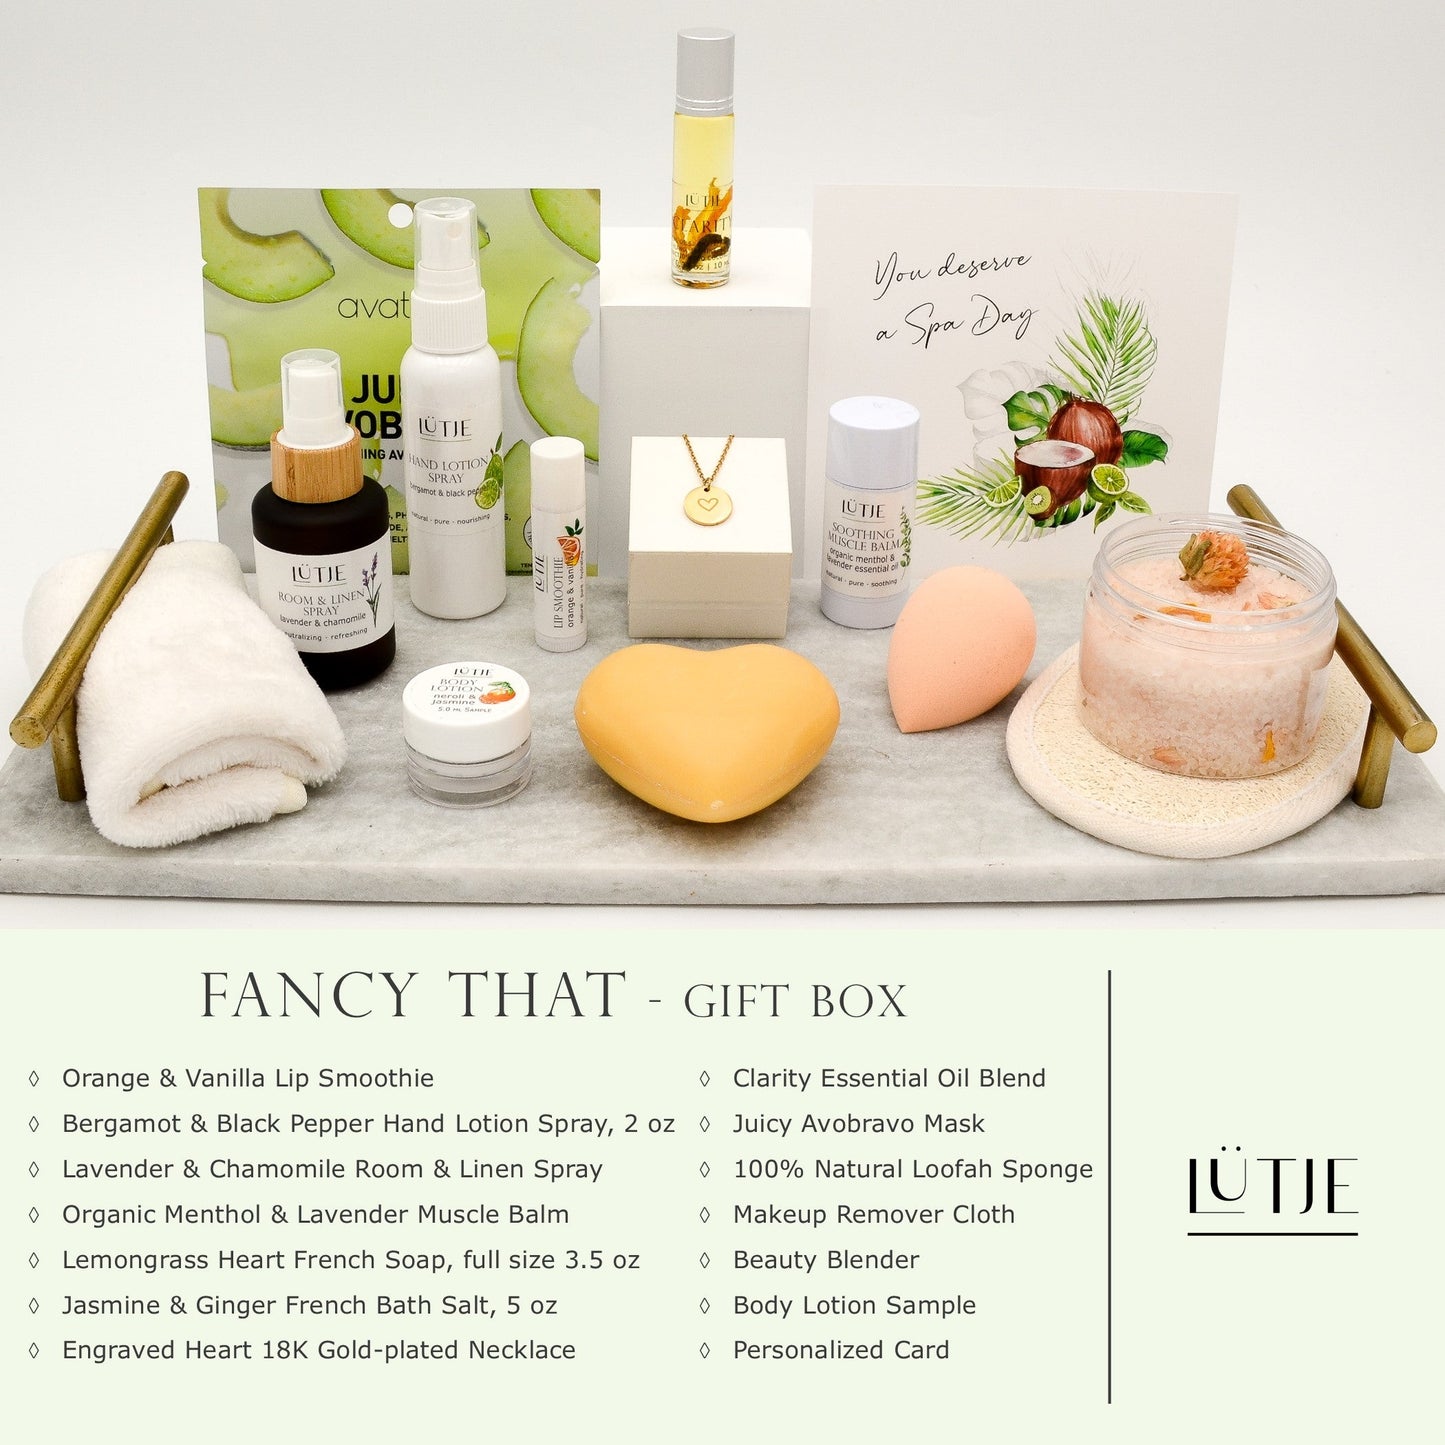 Fancy That Gift Box for women, BFF, wife, daughter, sister, mom, or grandma, includes Bergamot & Black Pepper hand lotion spray, essential oil, lip balm, soothing muscle balm, Lavender & Chamomile room & linen spray, French soap, French bath salts, hydrating face mask, other bath, spa and self-care items, and optional 18K gold-plated necklace with engraved heart.